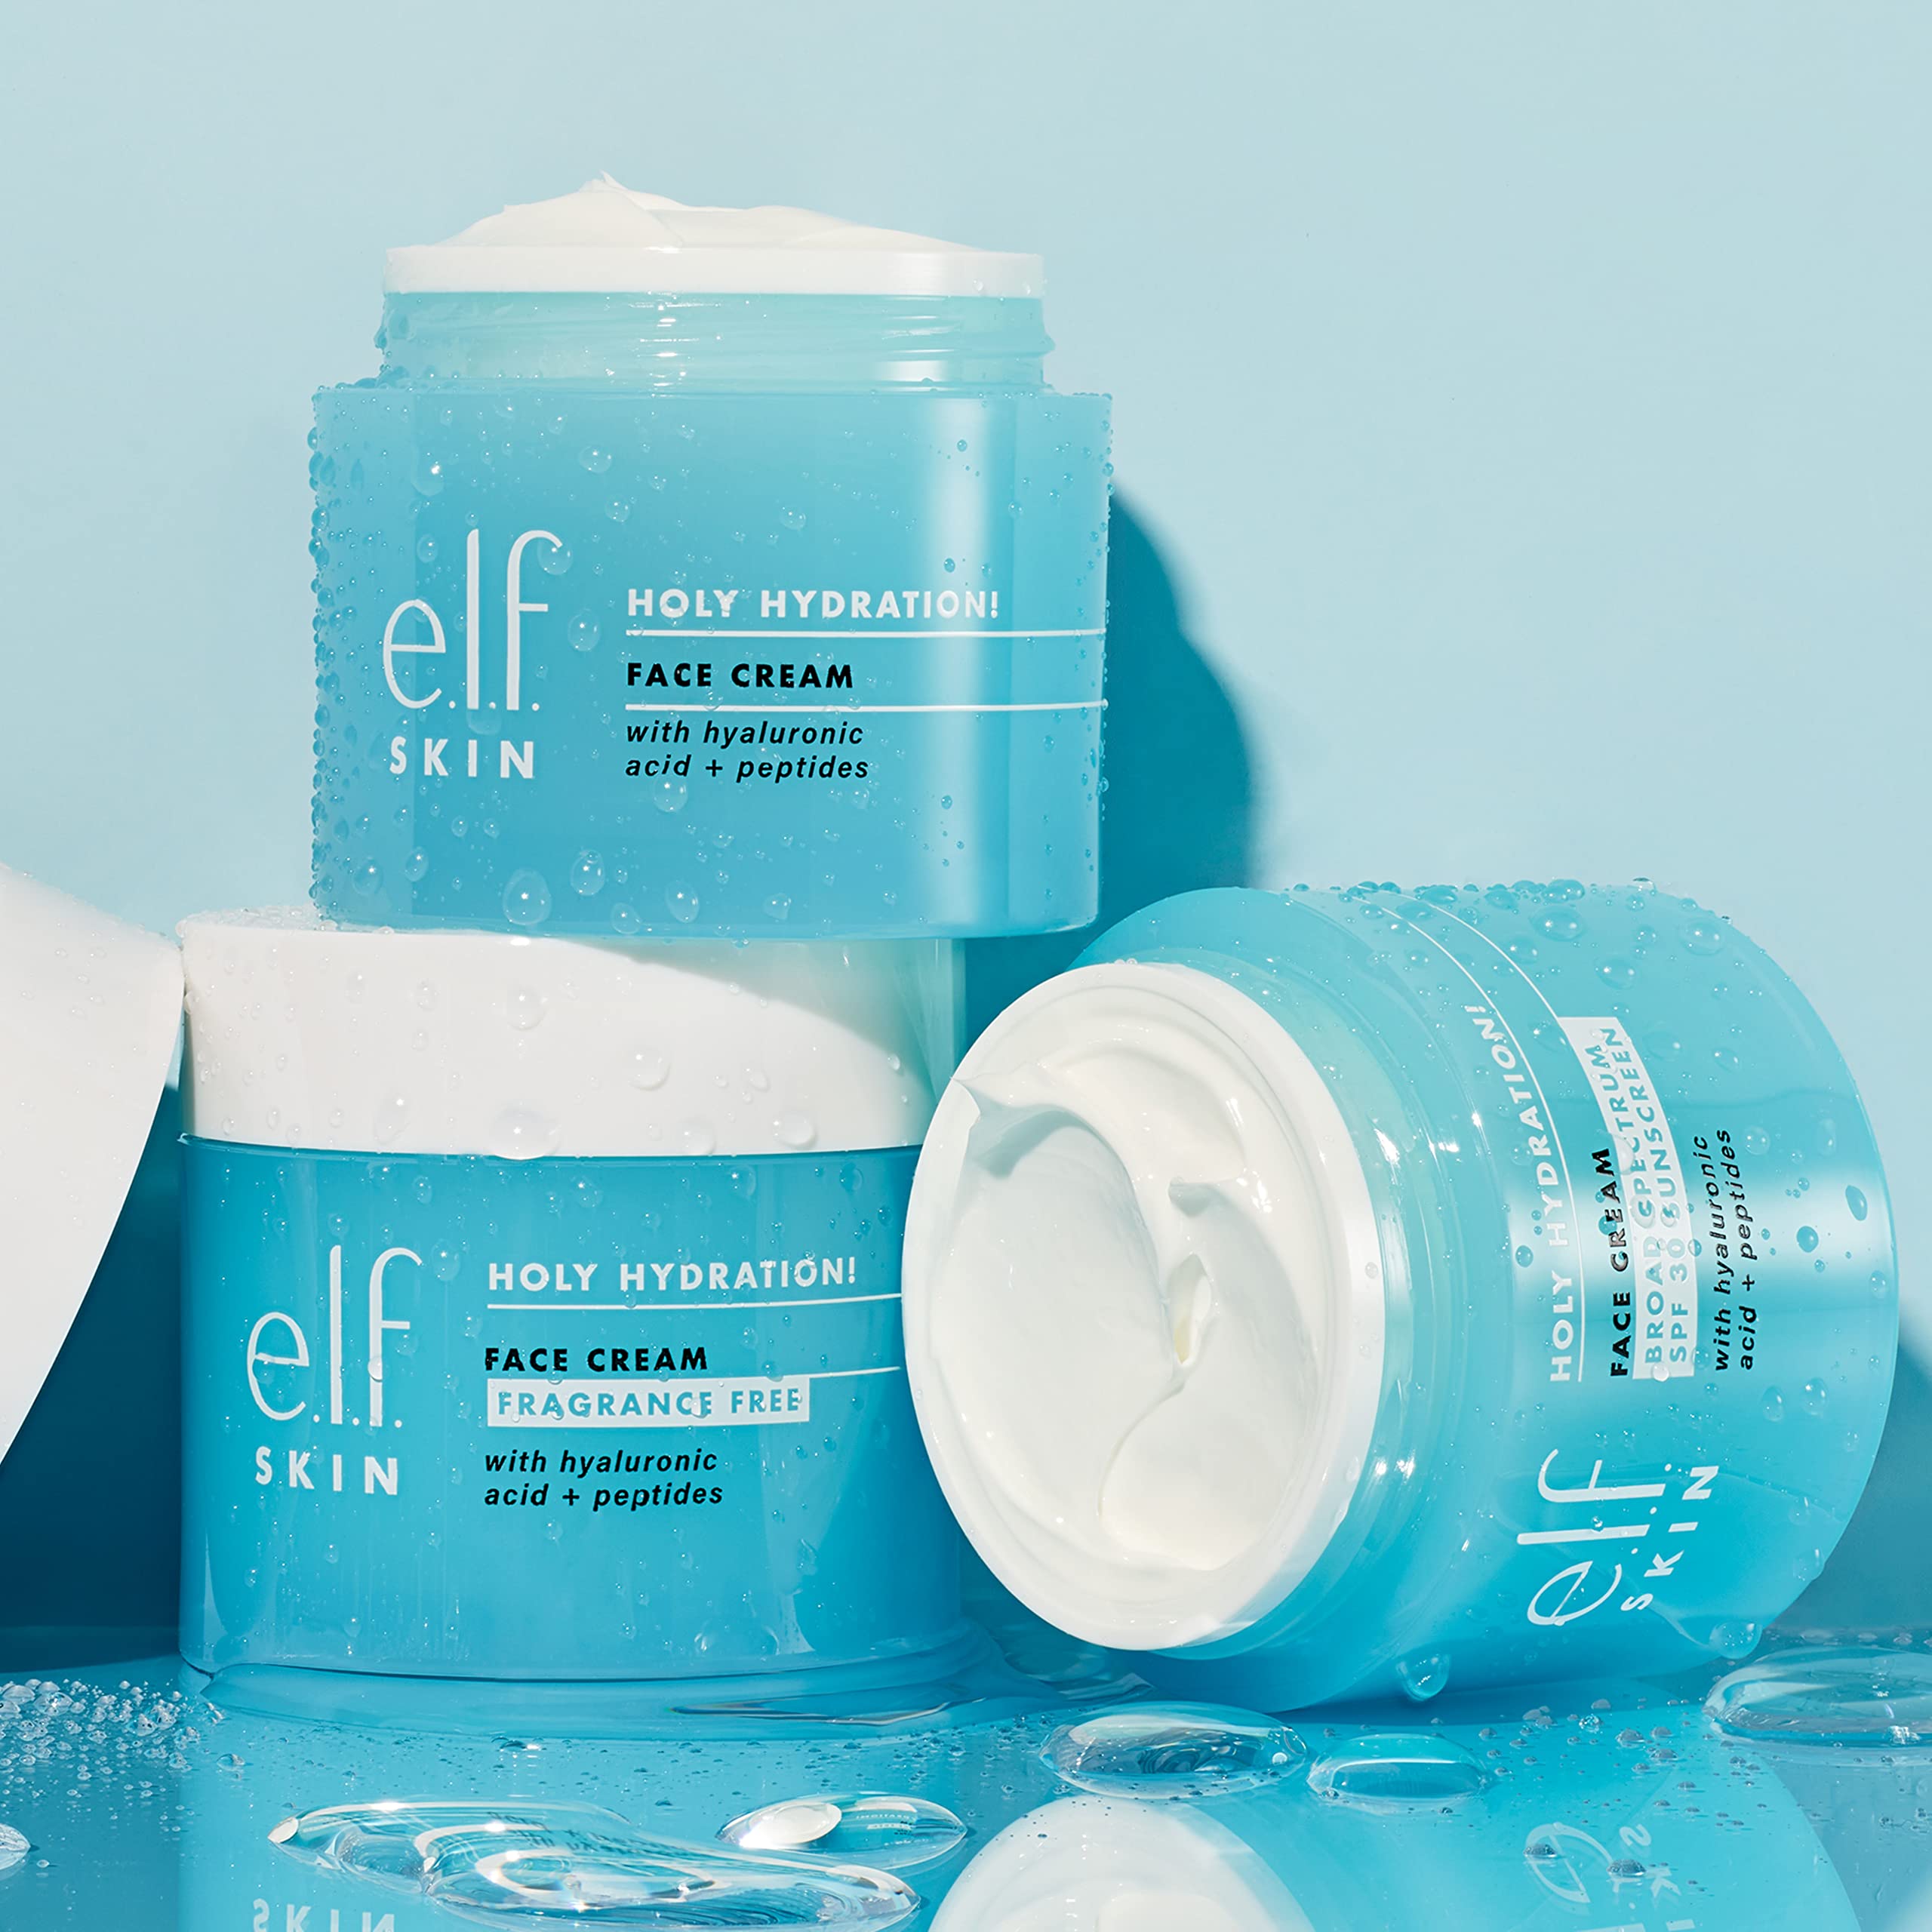 e.l.f. Holy Hydration! Face Cream - Broad Spectrum SPF 30 Sunscreen, Moisturizes & Softens Skin, Quick-Absorbing & Ultra-Hydrating, 1.8 Oz (50g)